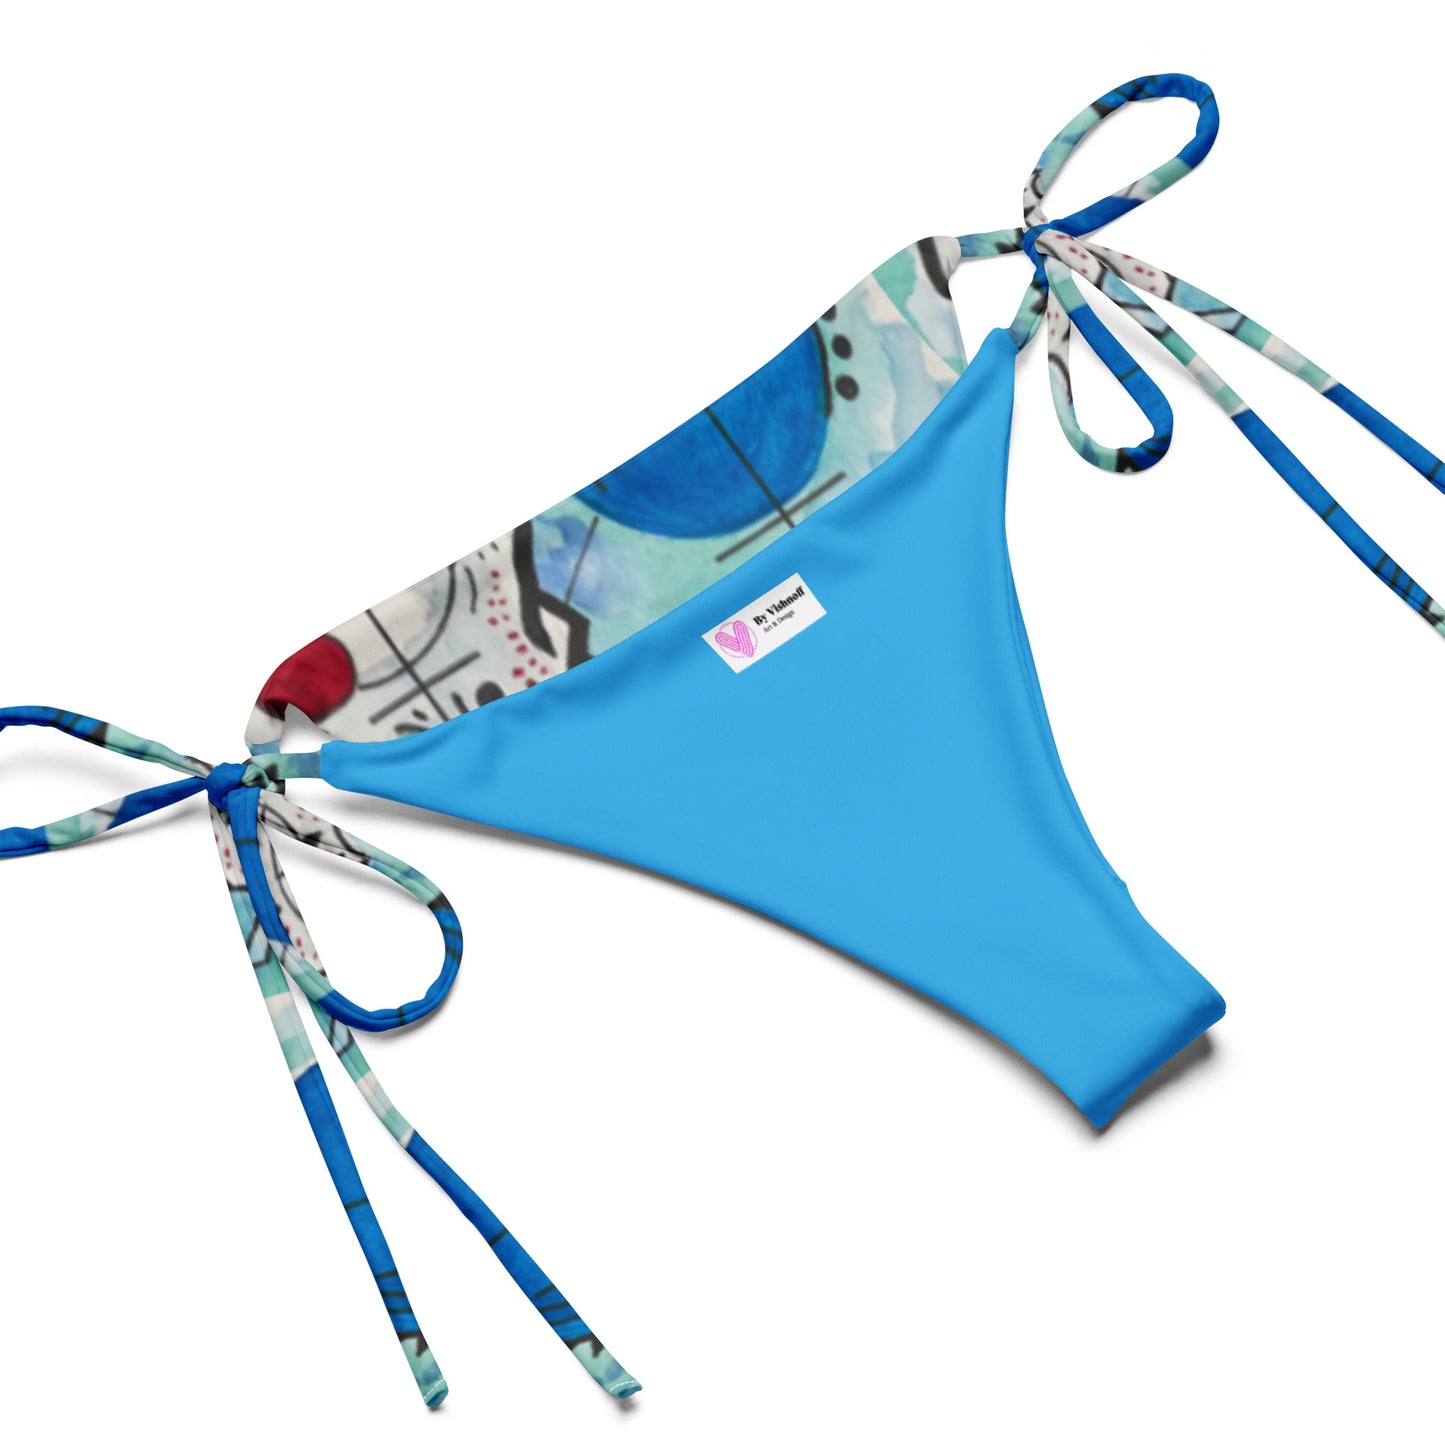 SeaHorse All-over print recycled string bikini